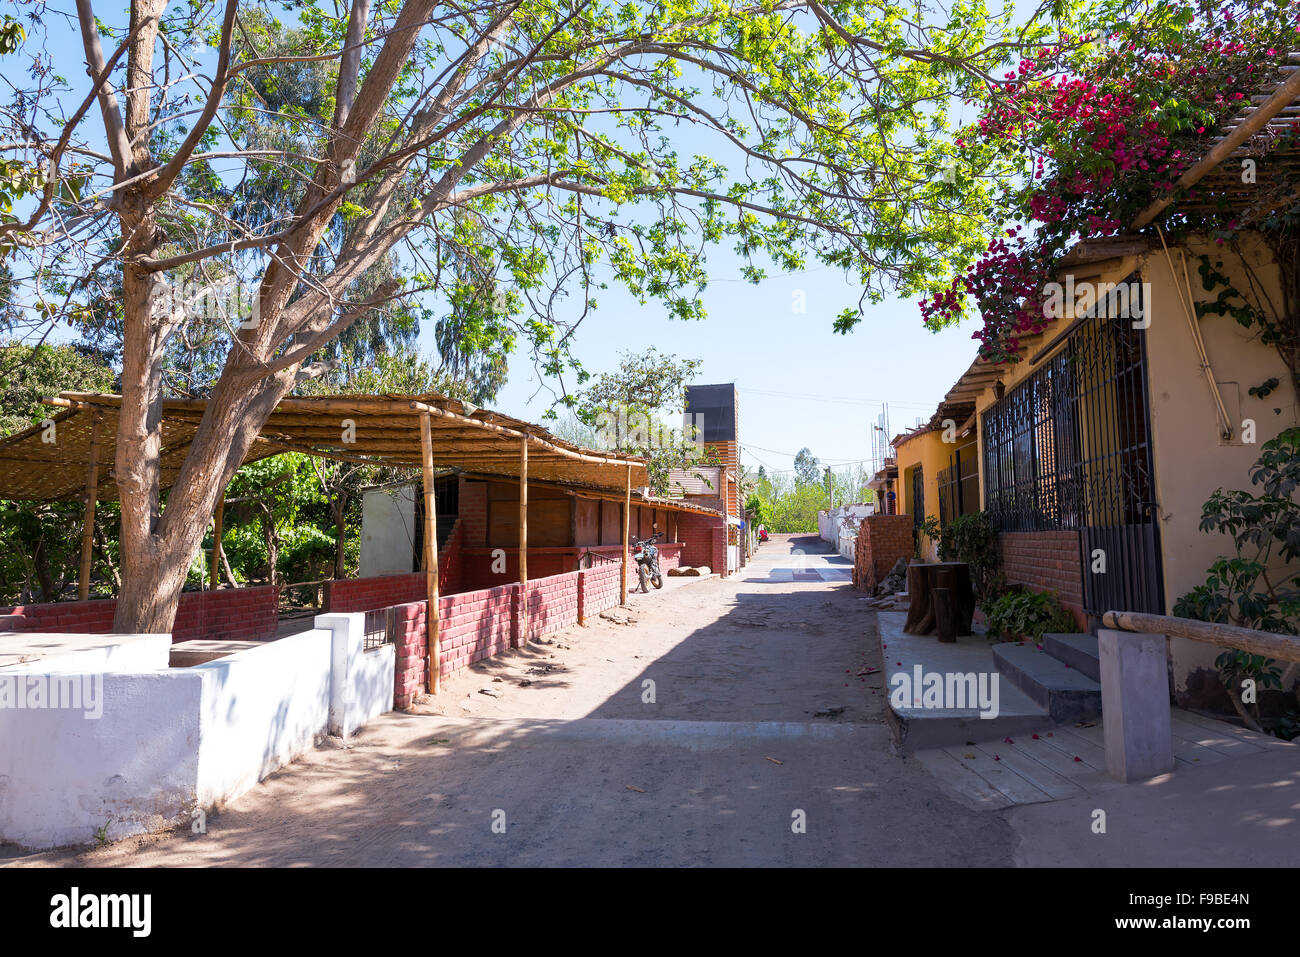 Street in Ica, Peru where many pisco distilleries are located Stock Photo